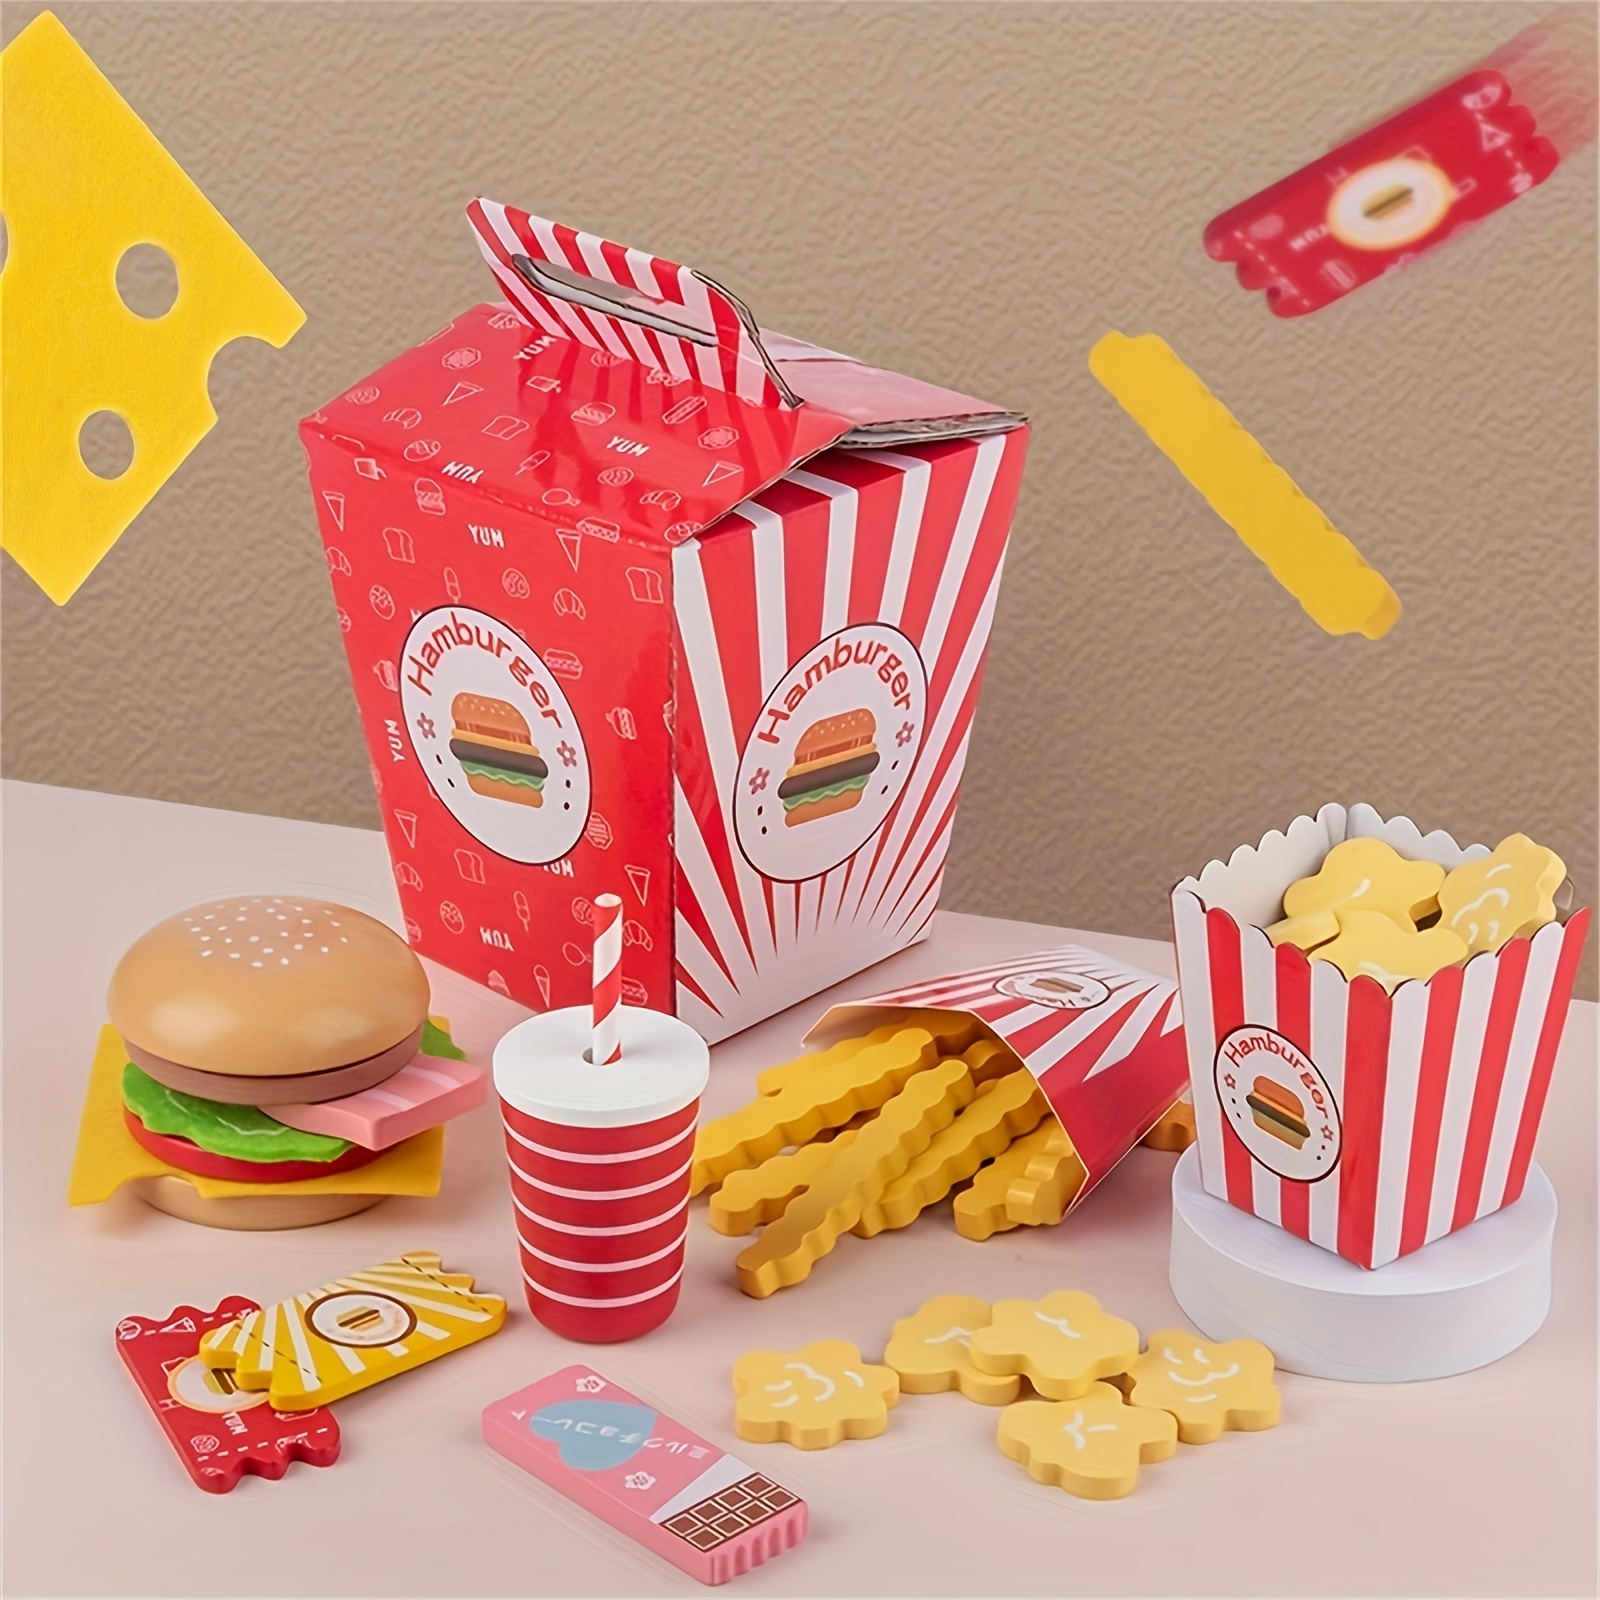 

Wooden Burger, Fries, Fast Food Toy Set, Meal For Pretend Play With Burger, Fries, Drink, Cooking Simulation Educational Toy And Color Perception Toy